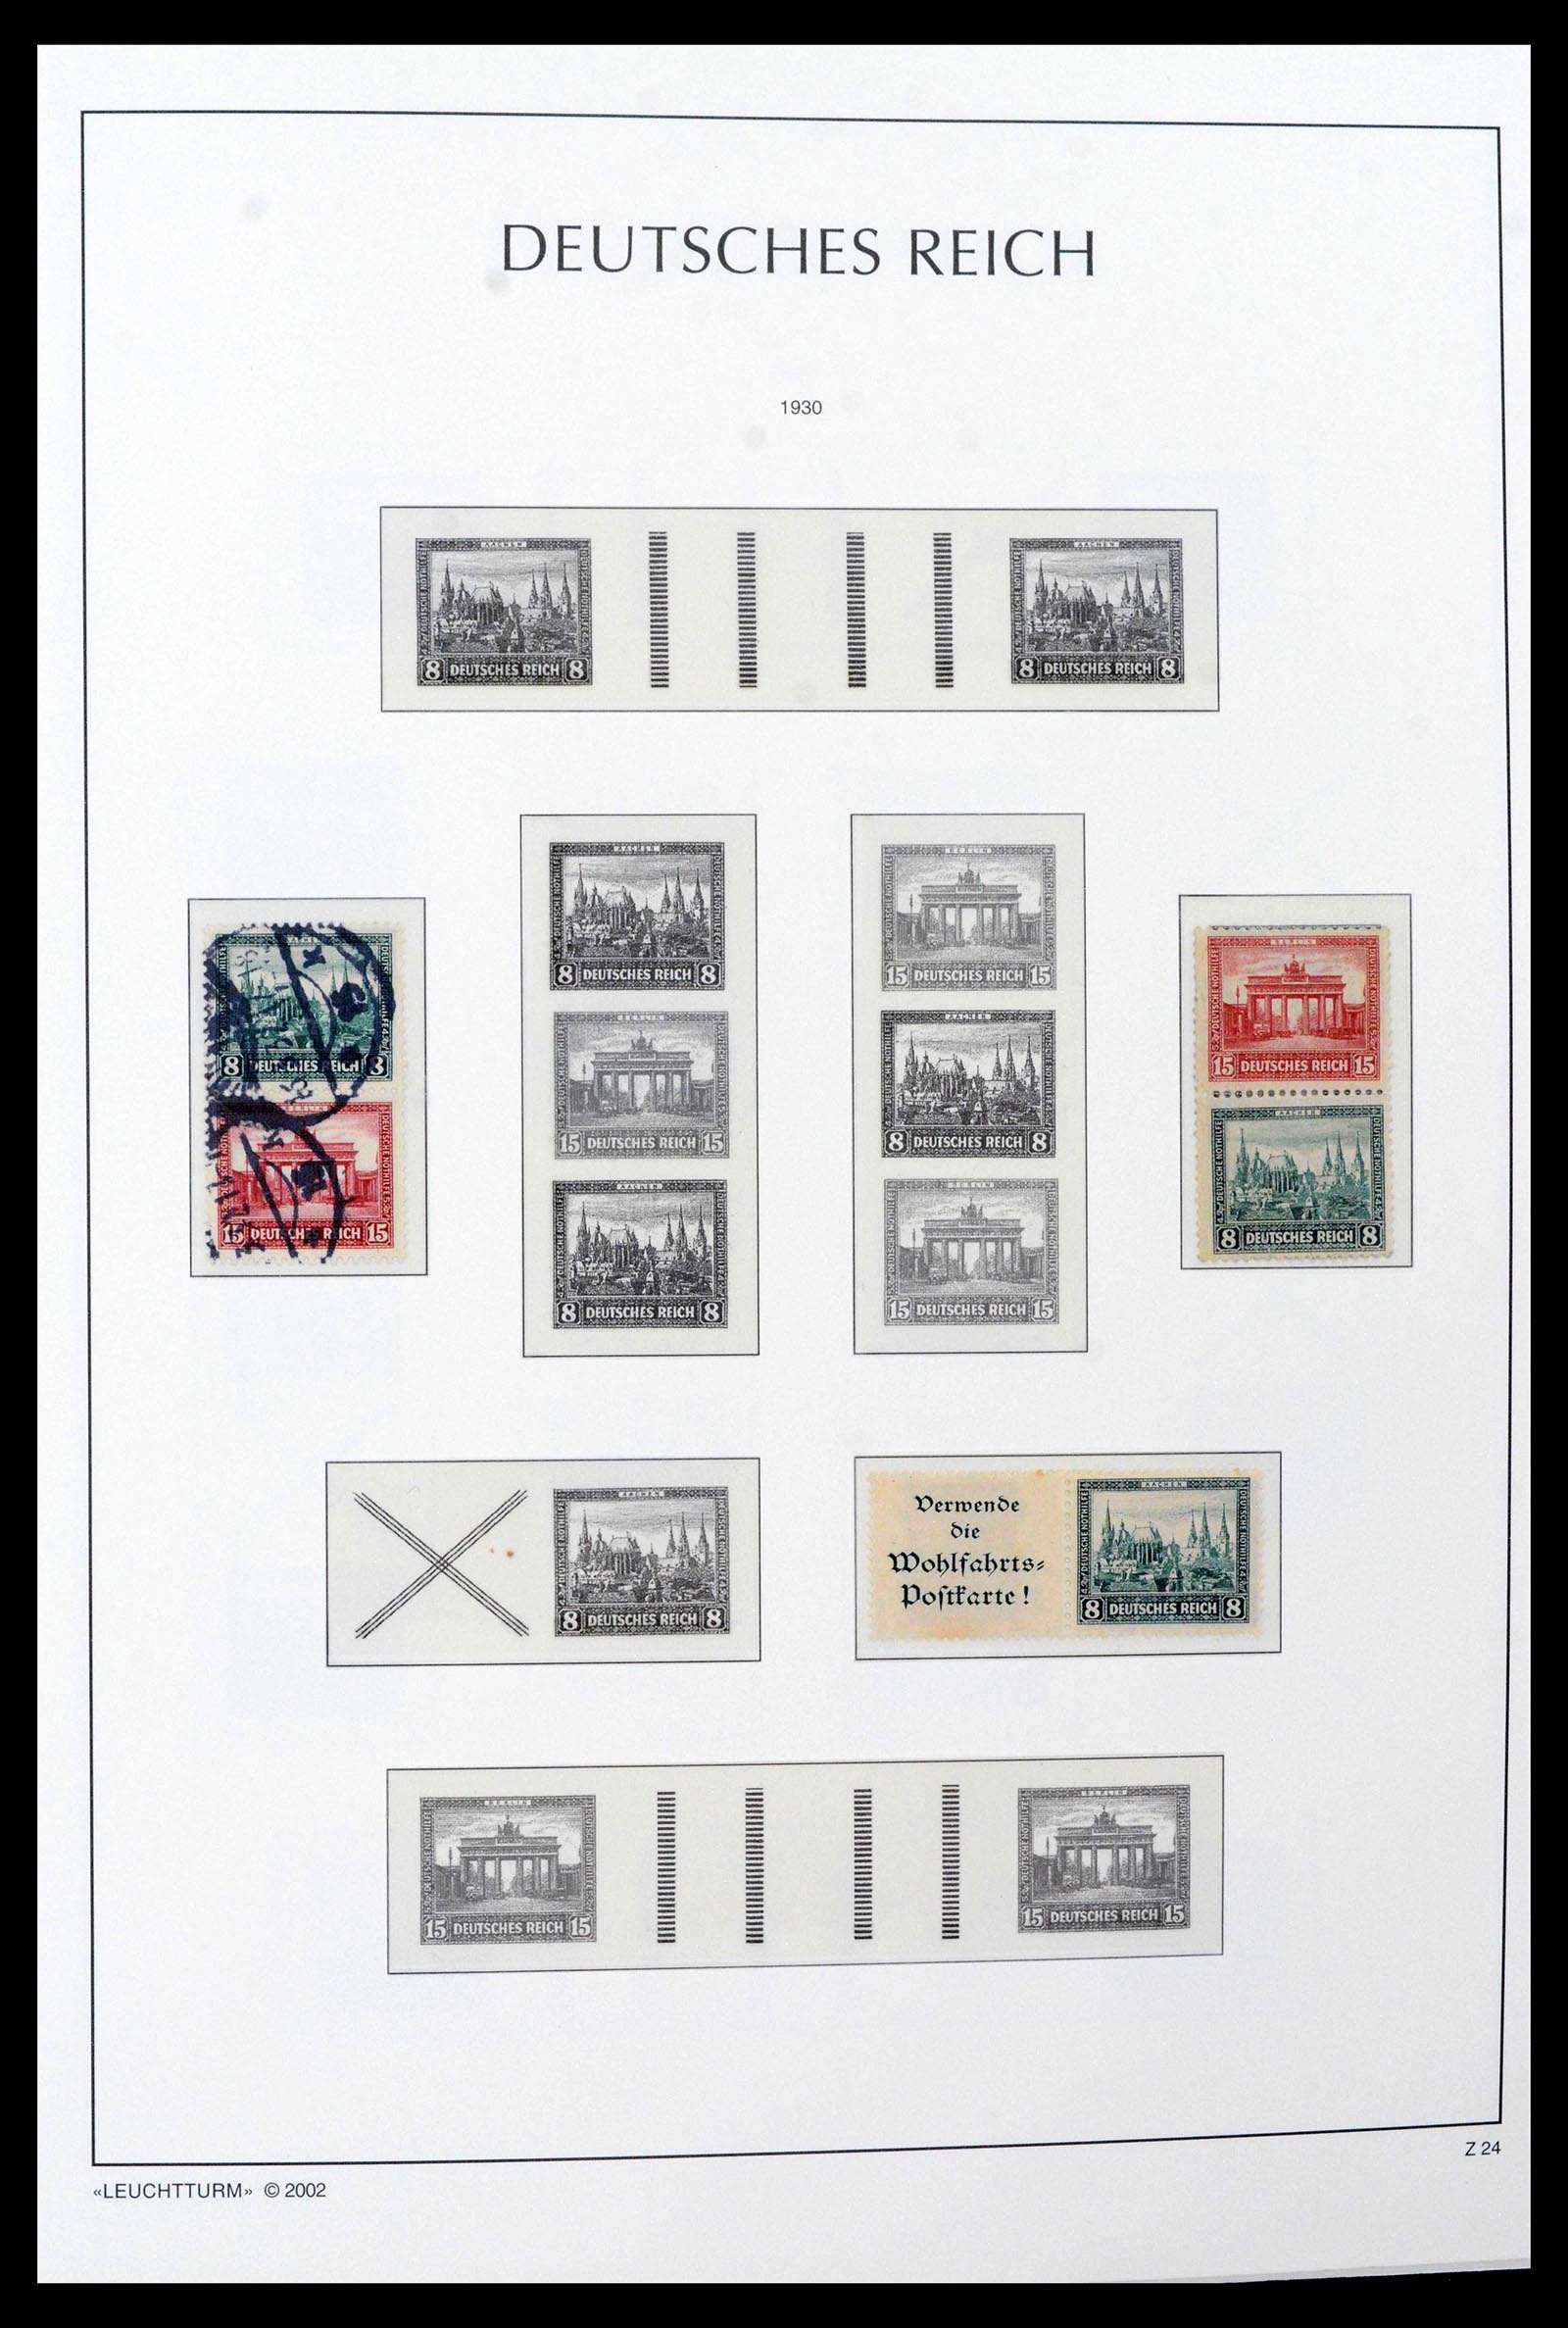 39045 0026 - Stamp collection 39045 German Reich combinations 1913-1941.